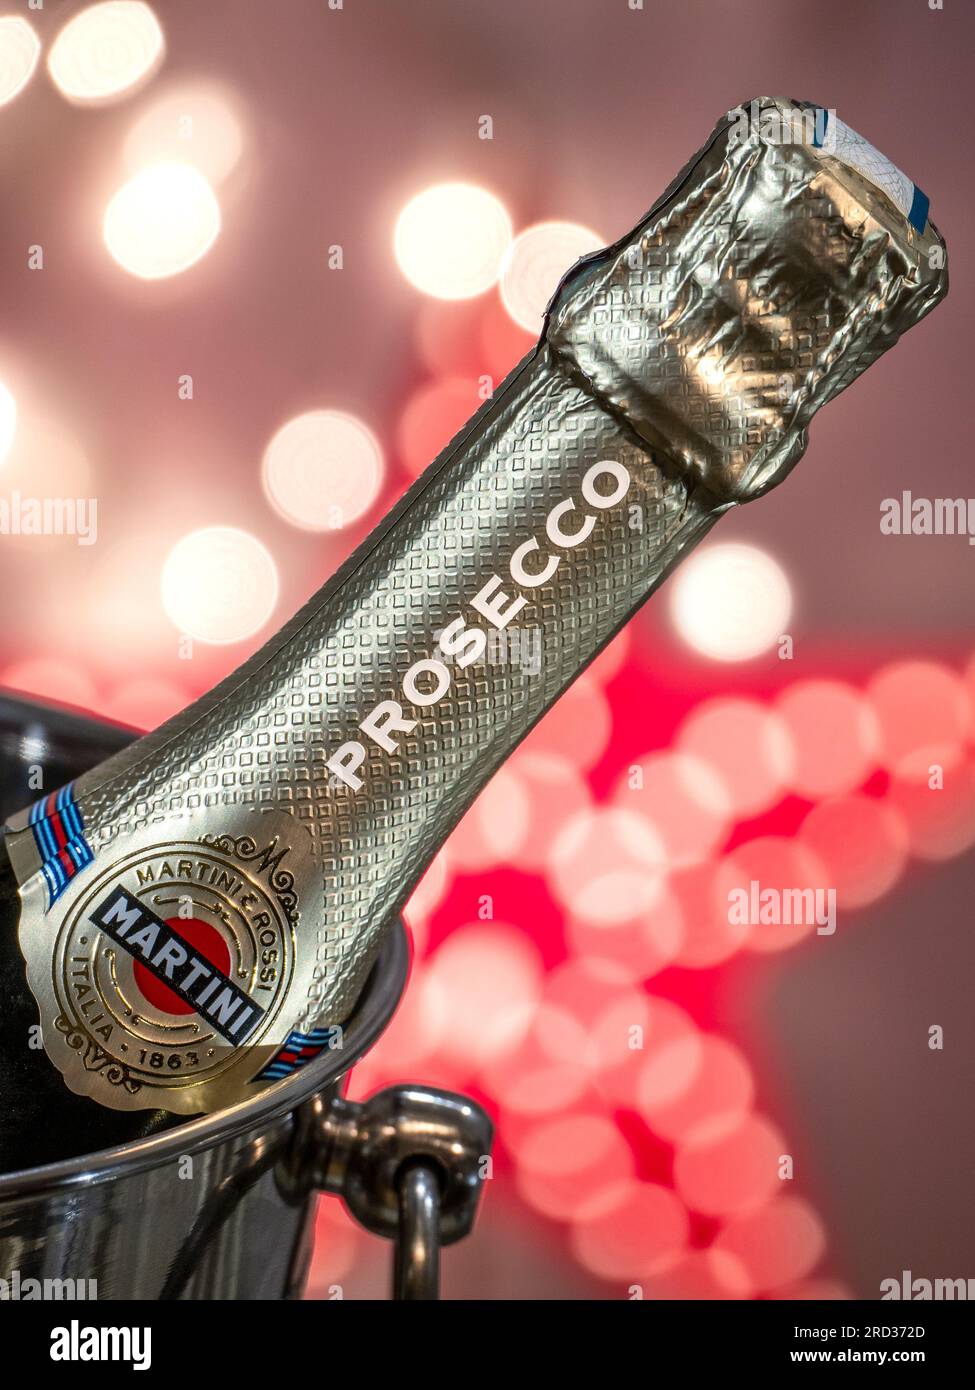 PROSECCO CHRISTMAS PARTY LIGHTS Prosecco bottle on ice in wine cooler with party star and sparkling celebration lights Stock Photo